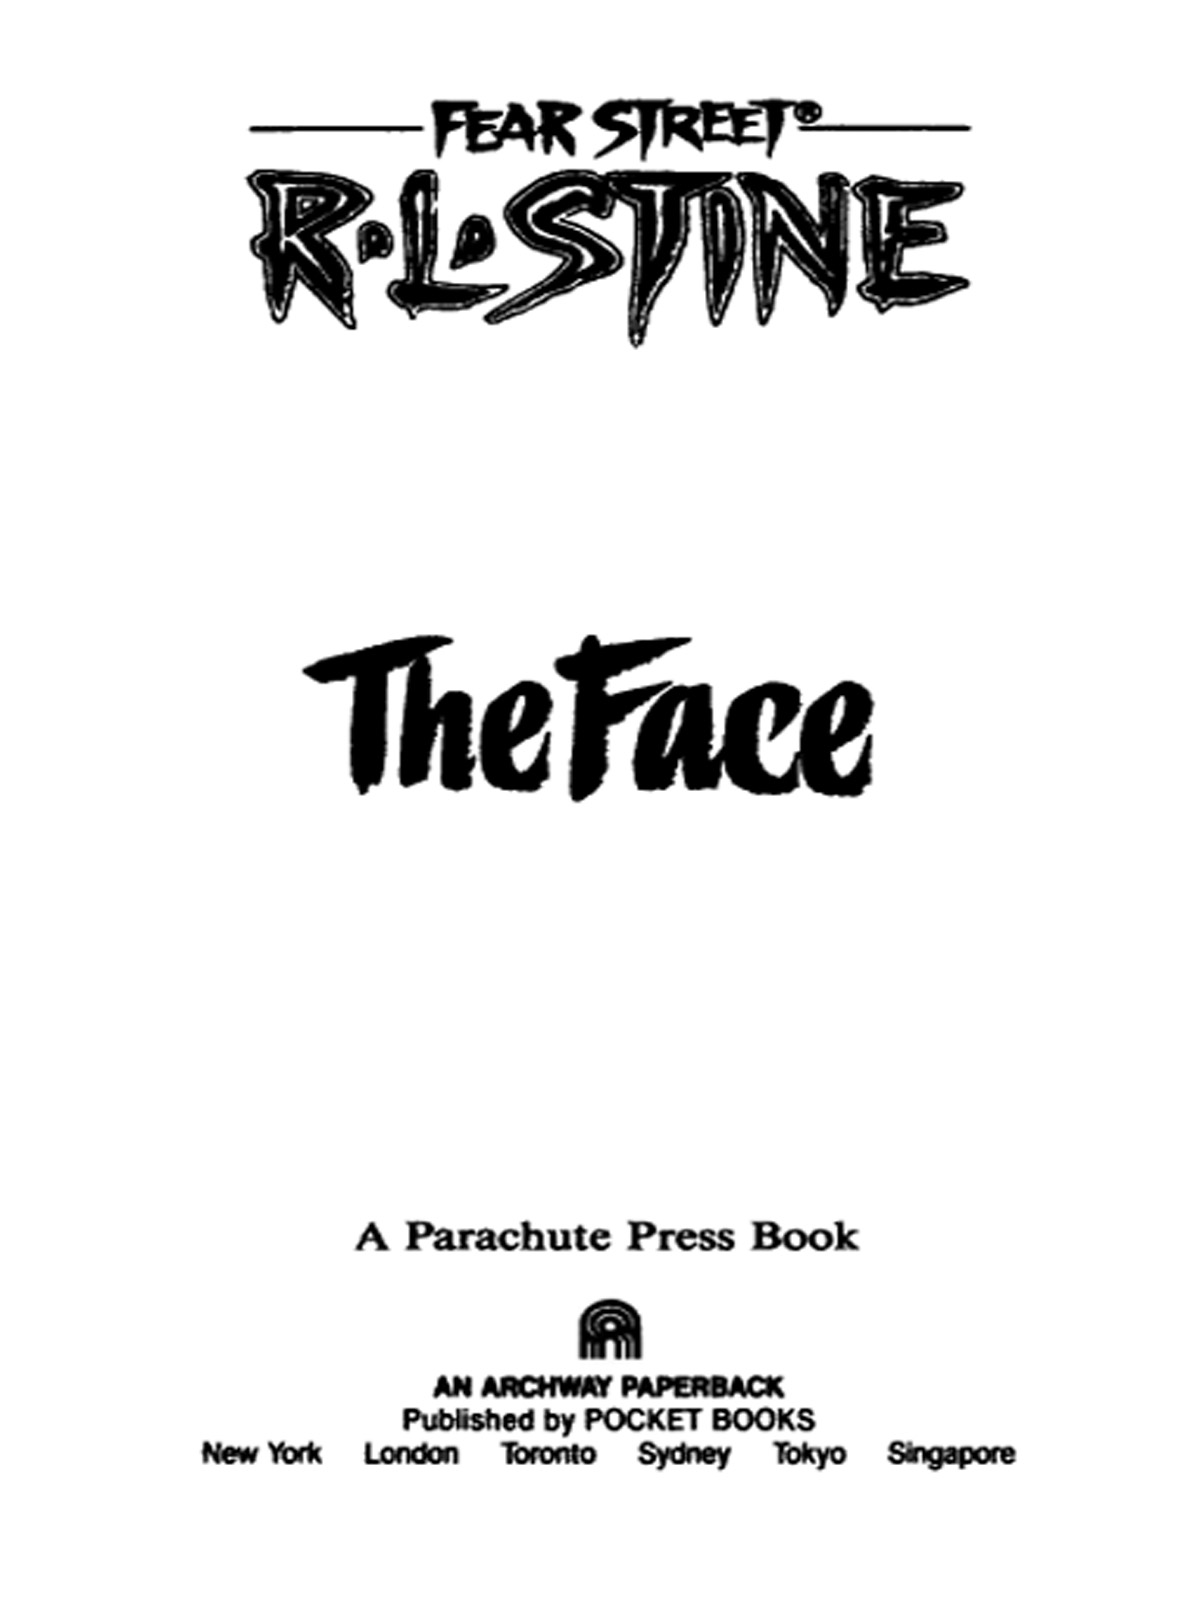 The Face (1996) by R.L. Stine